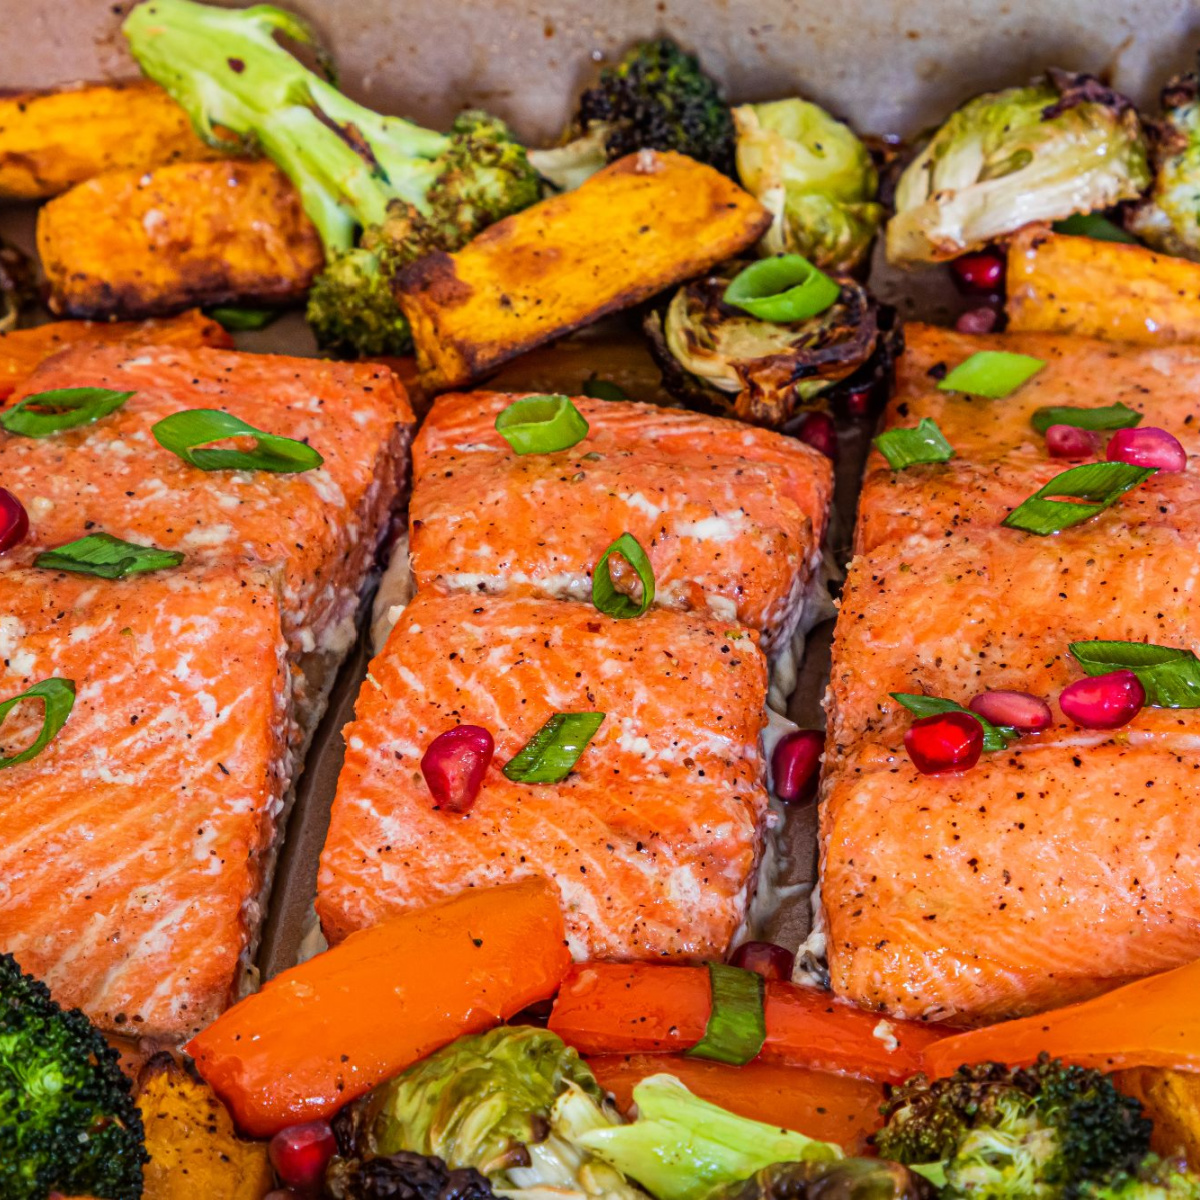 cooked salmon with broccoli, brussels sprouts and sweet potato in the background and sprinkled with spring onions and pomegranate